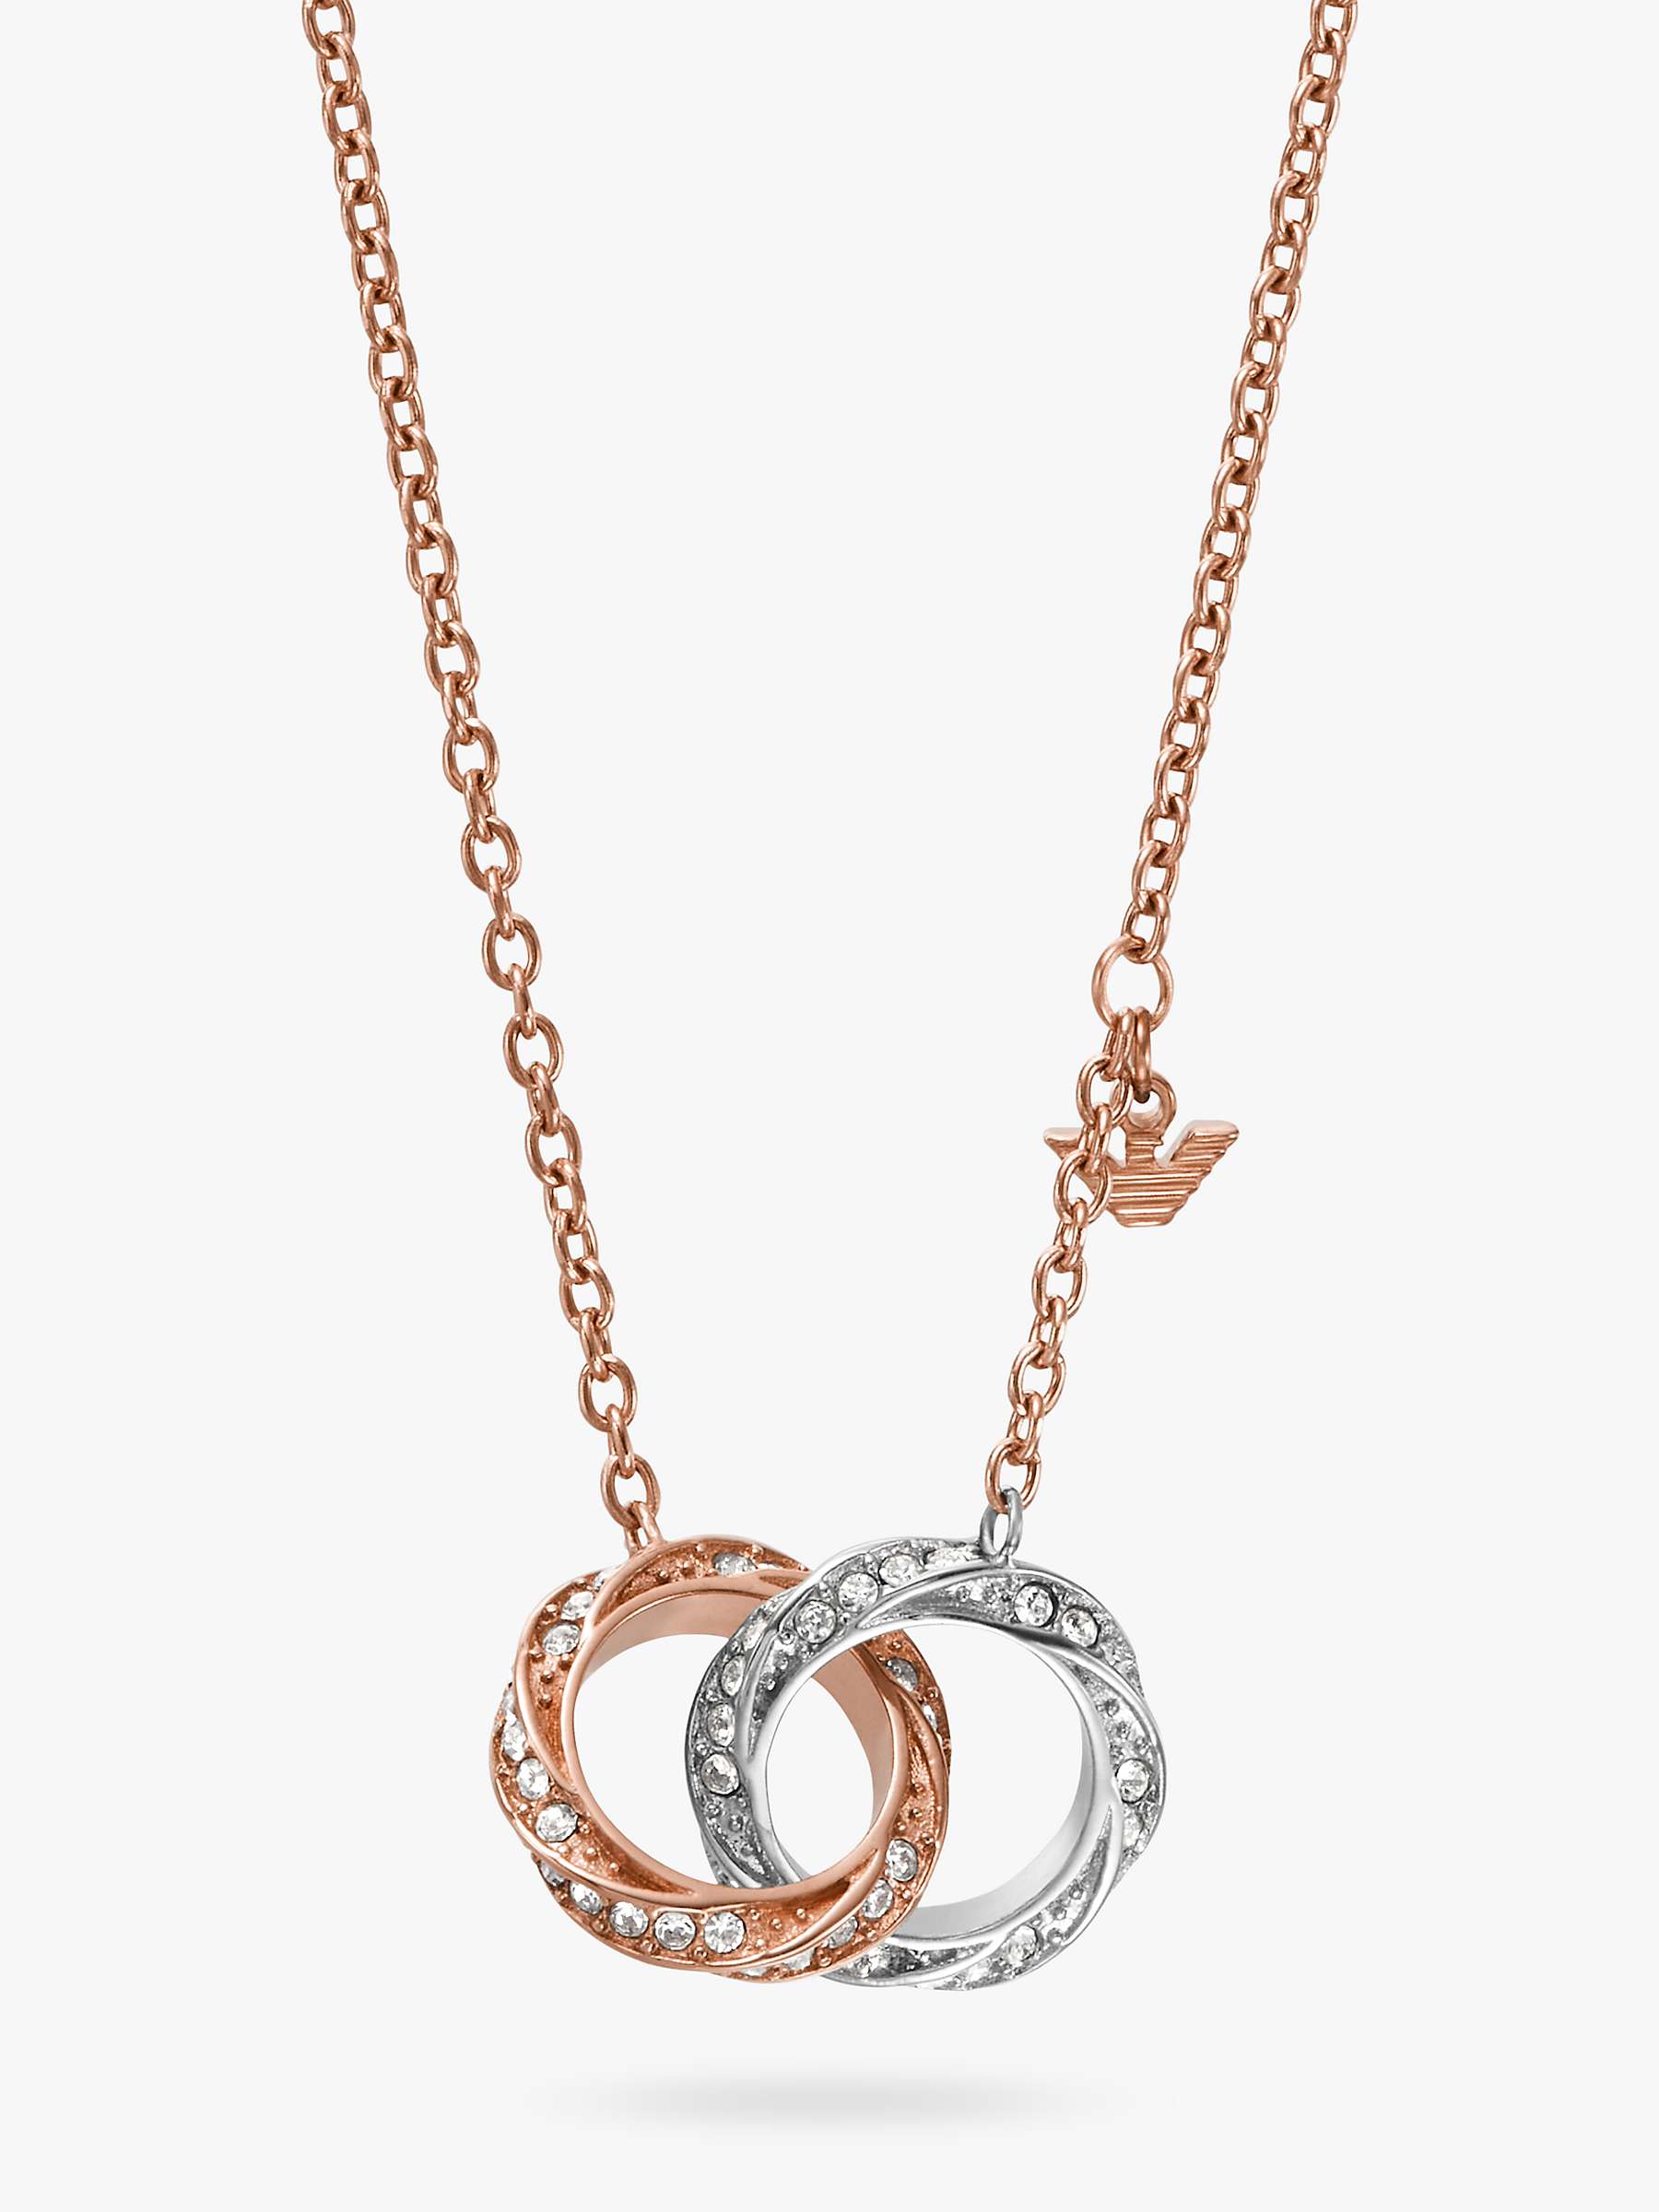 Buy Emporio Armani Crystal Circle Link Pendant Necklace, Rose Gold/Silver Online at johnlewis.com